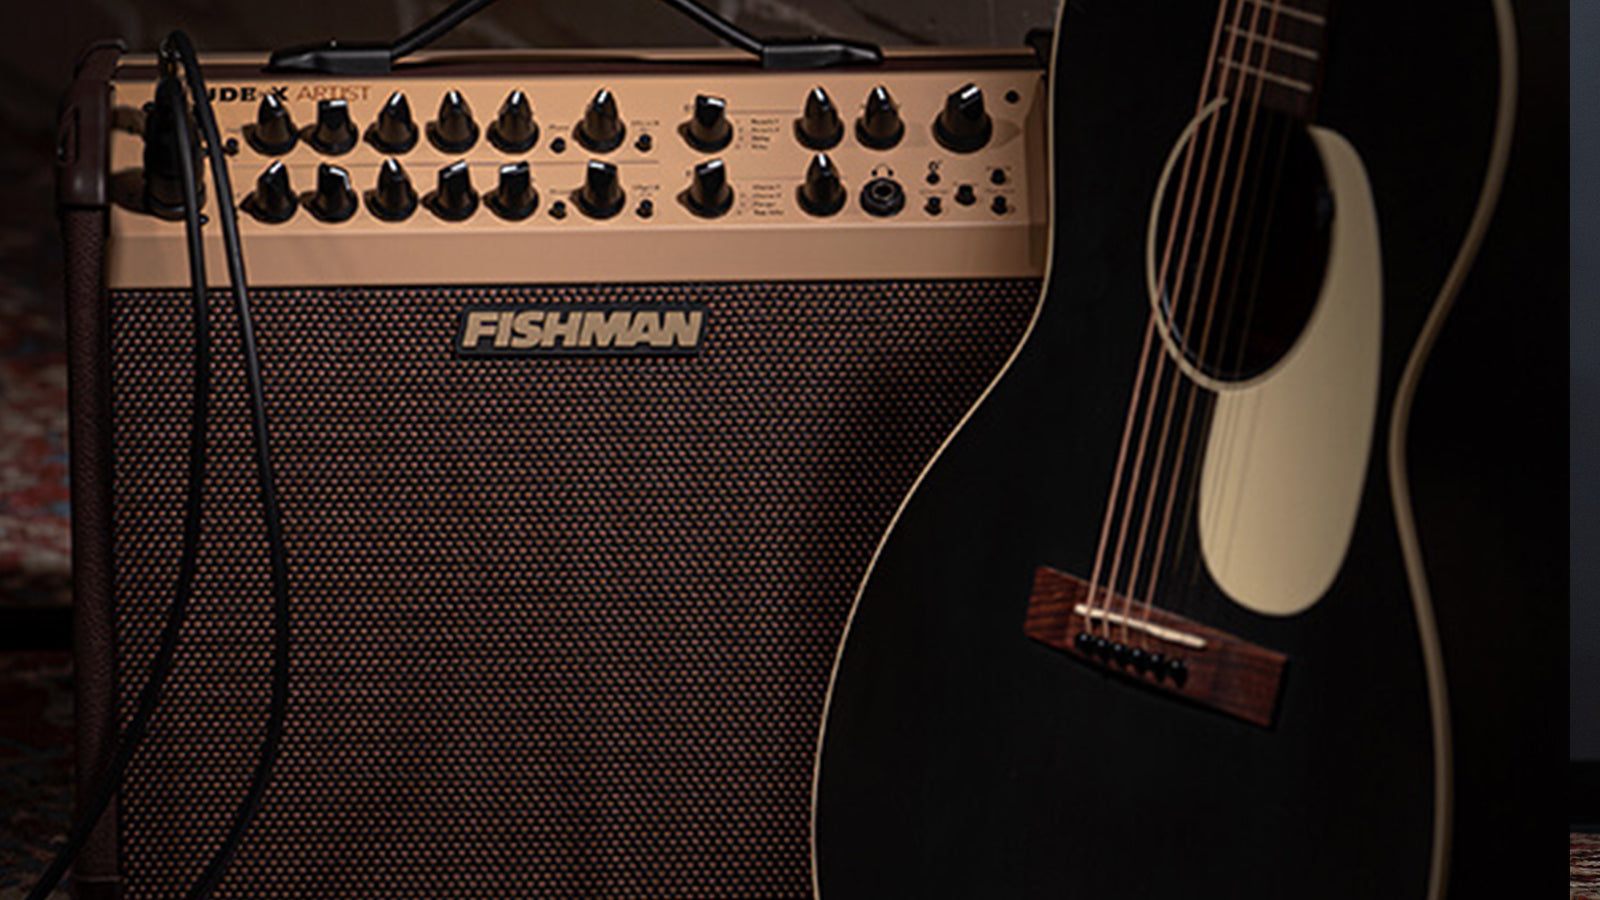 A Fishman amp with a guitar next to it